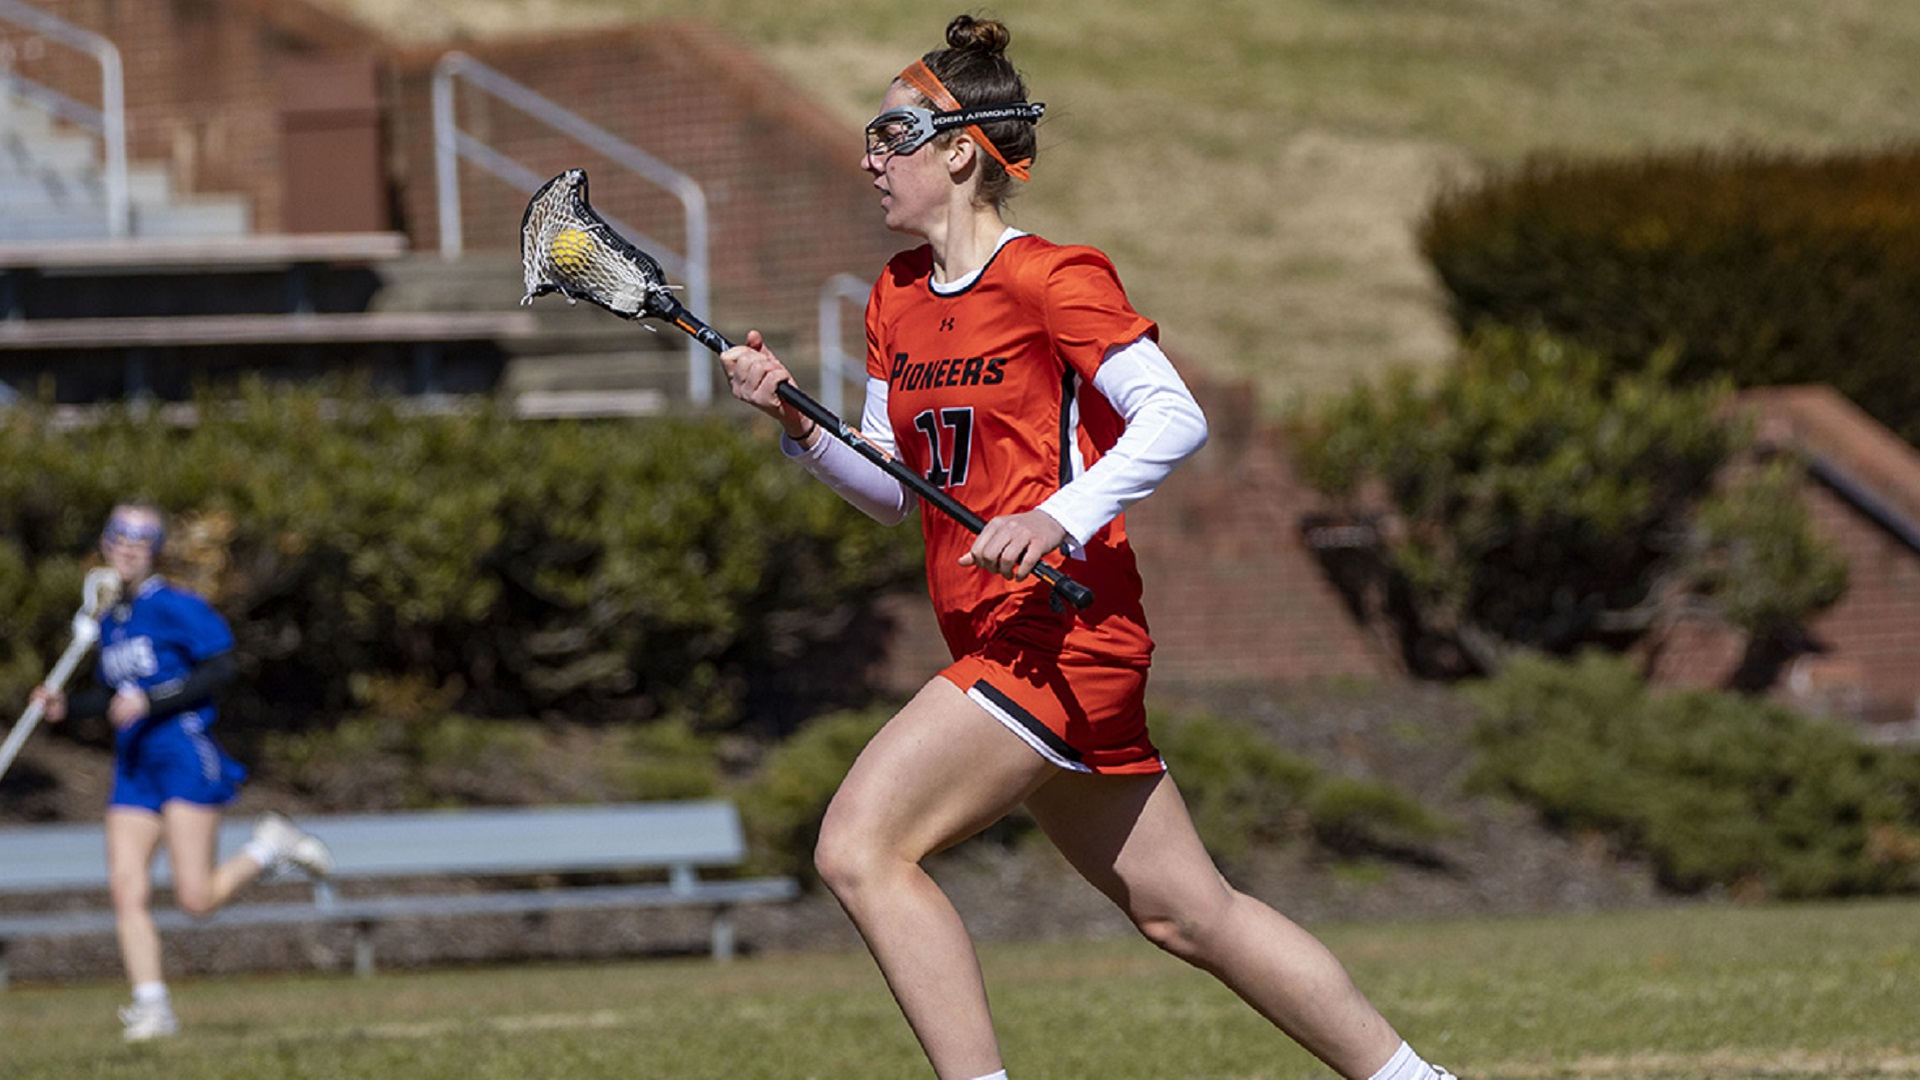 Pioneers score early and often in 19-6 win at Lees-McRae